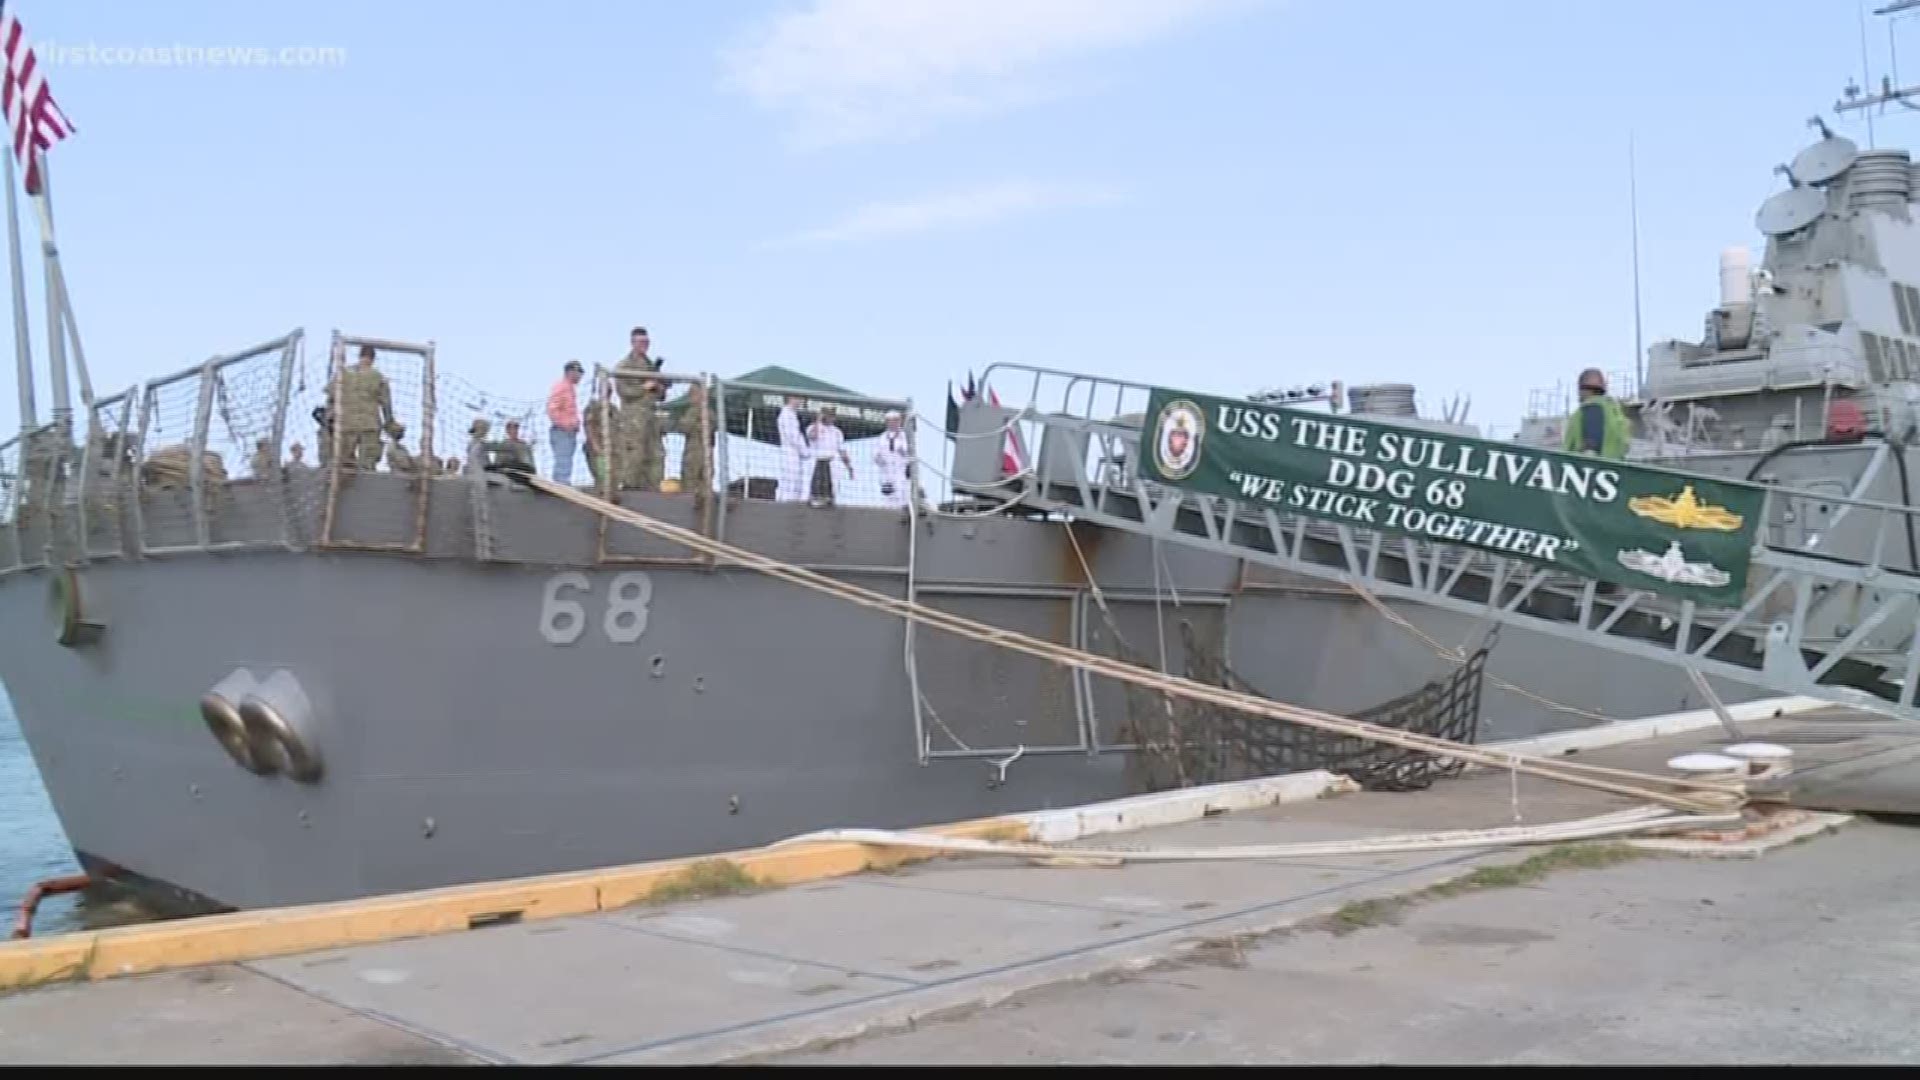 Members of the Sullivan family had a reunion at the vessel stationed at Mayport to honor five Sullivan brothers who died in action while serving on the USS Juneau.